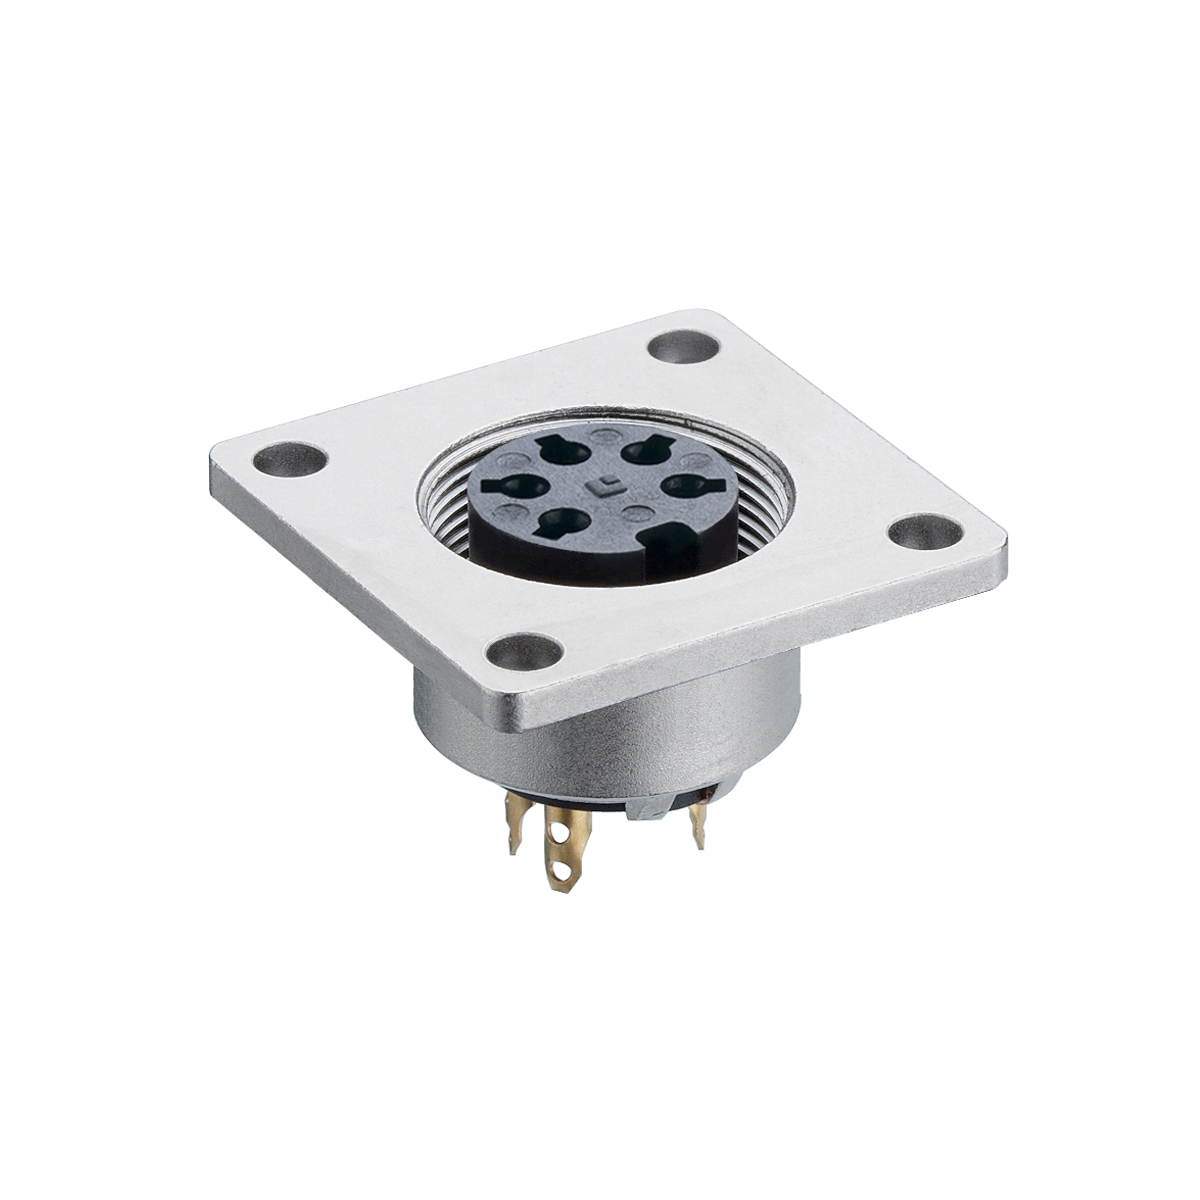 Lumberg: 308 (Series 03 | Circular connectors with threaded joint M16 acc. to IEC 61076-2-106, IP40/IP68)